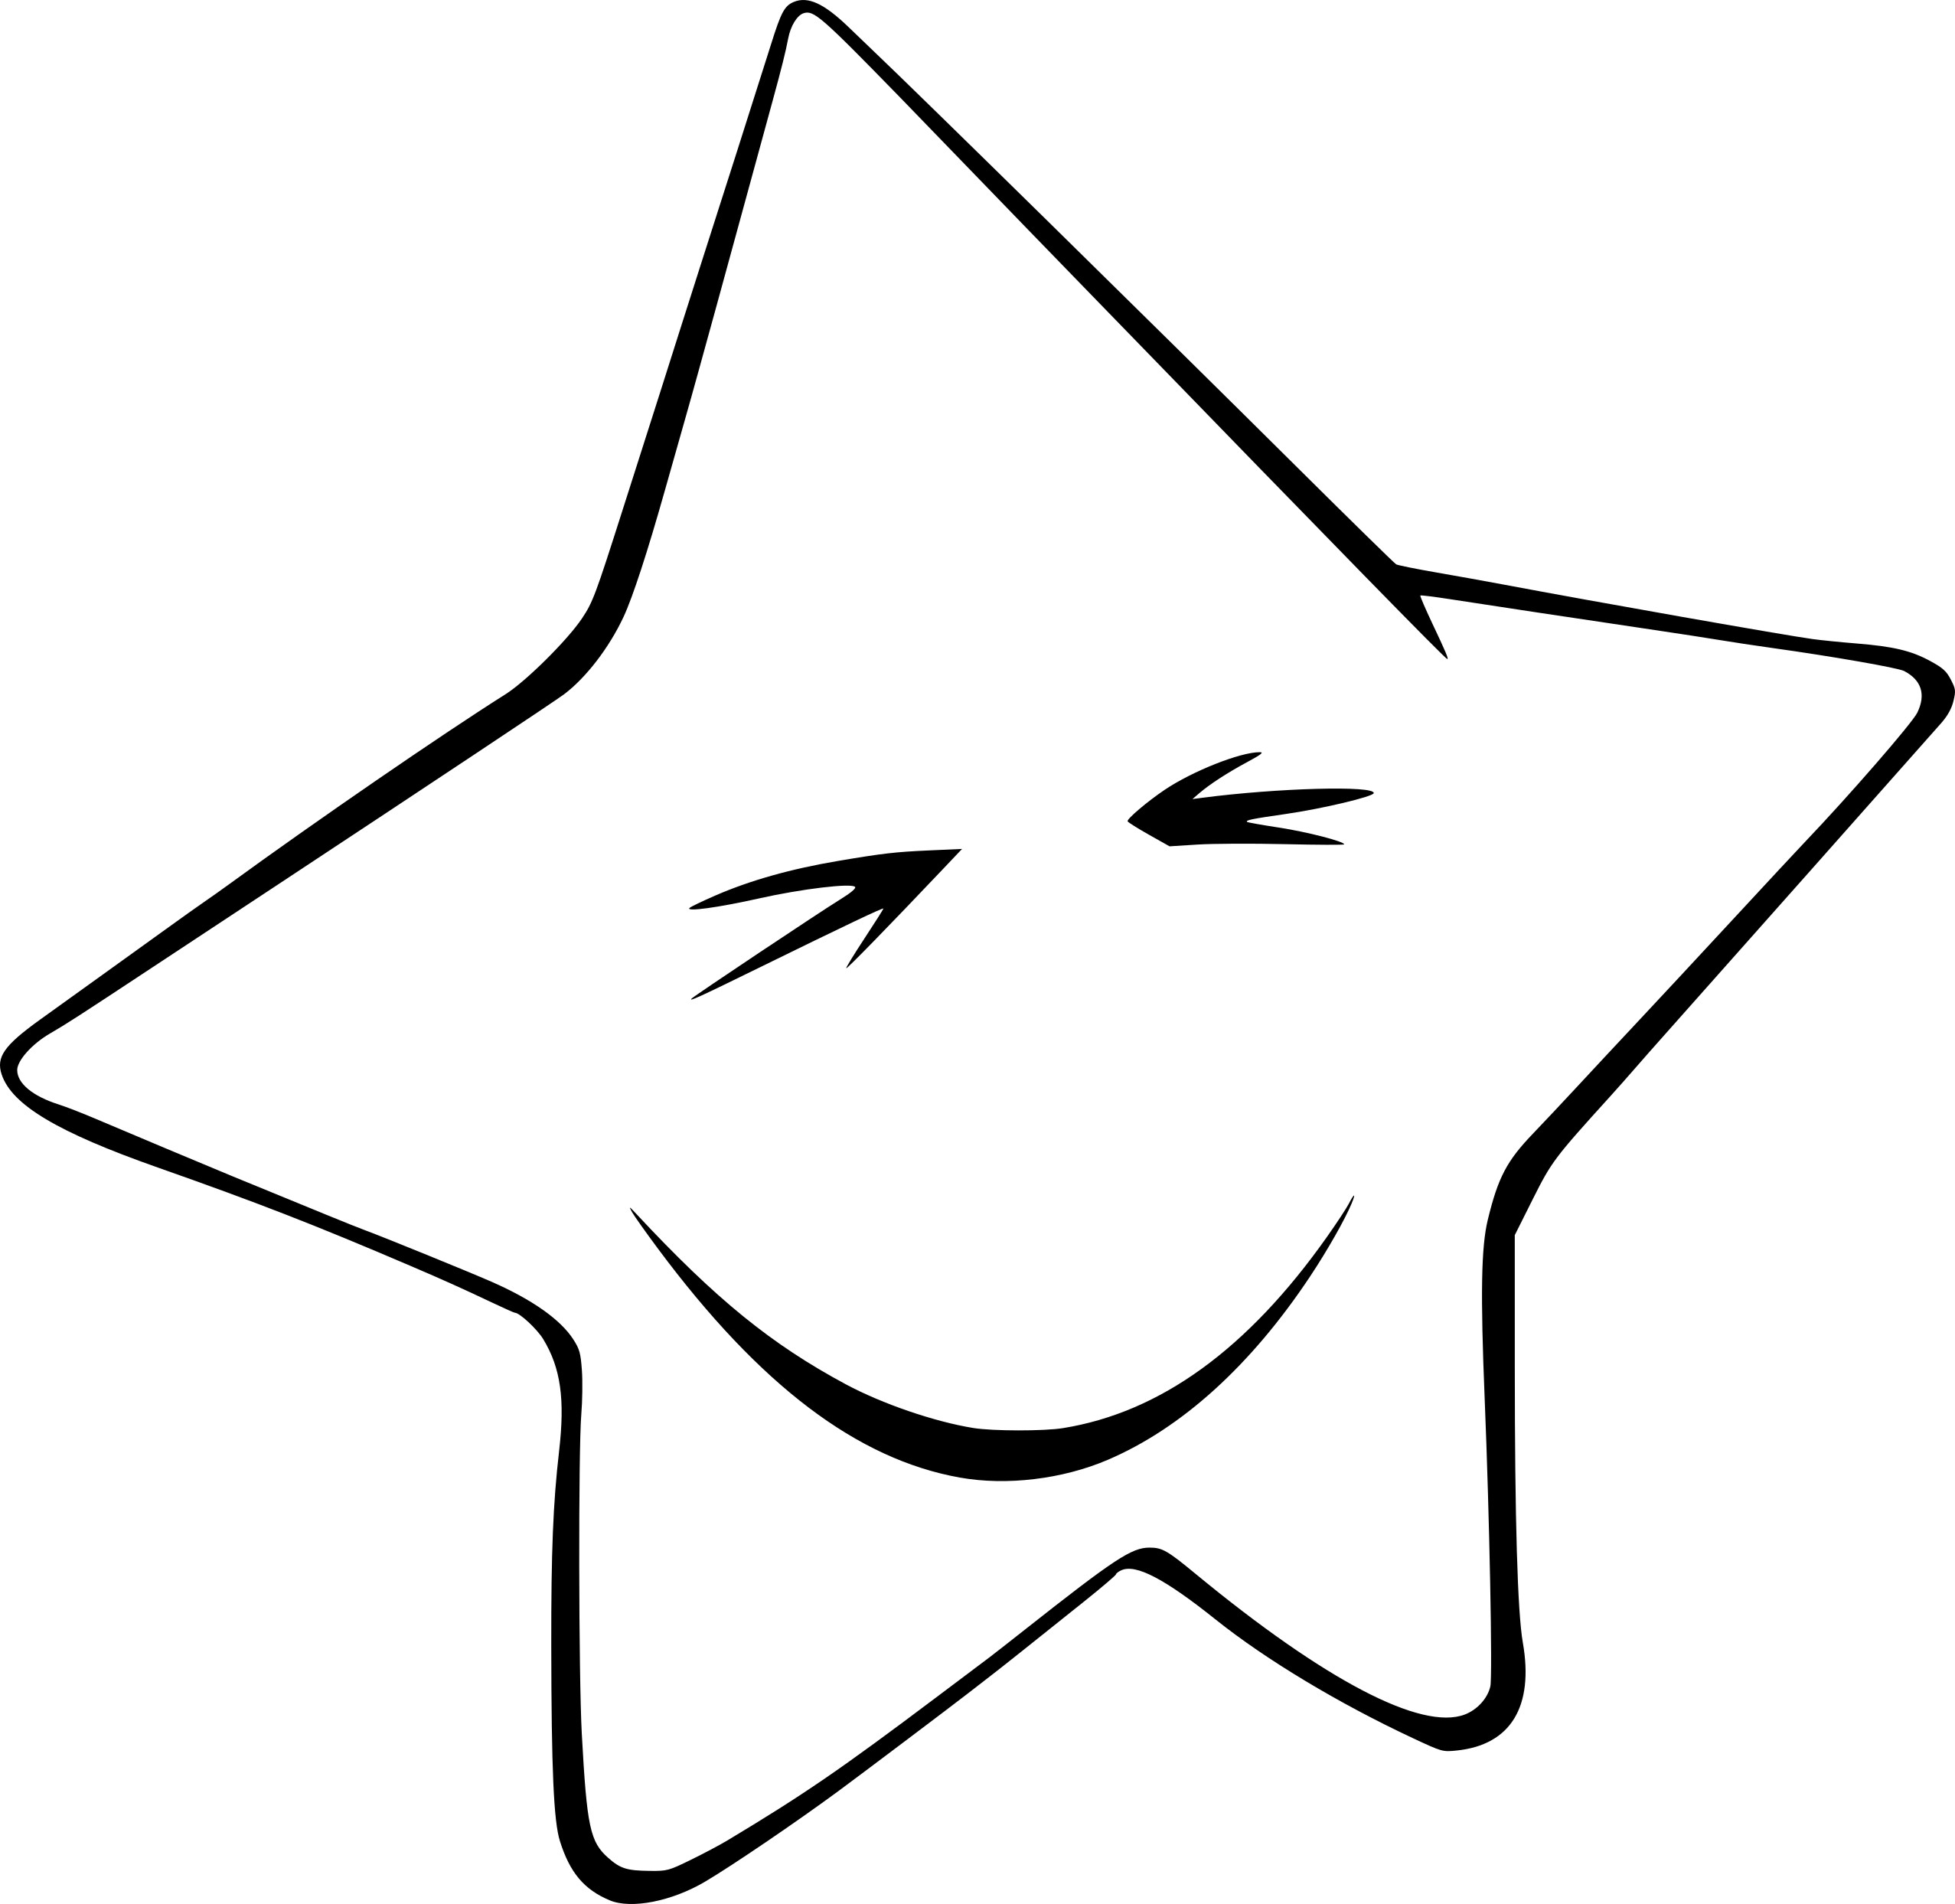 Funny Star coloring page